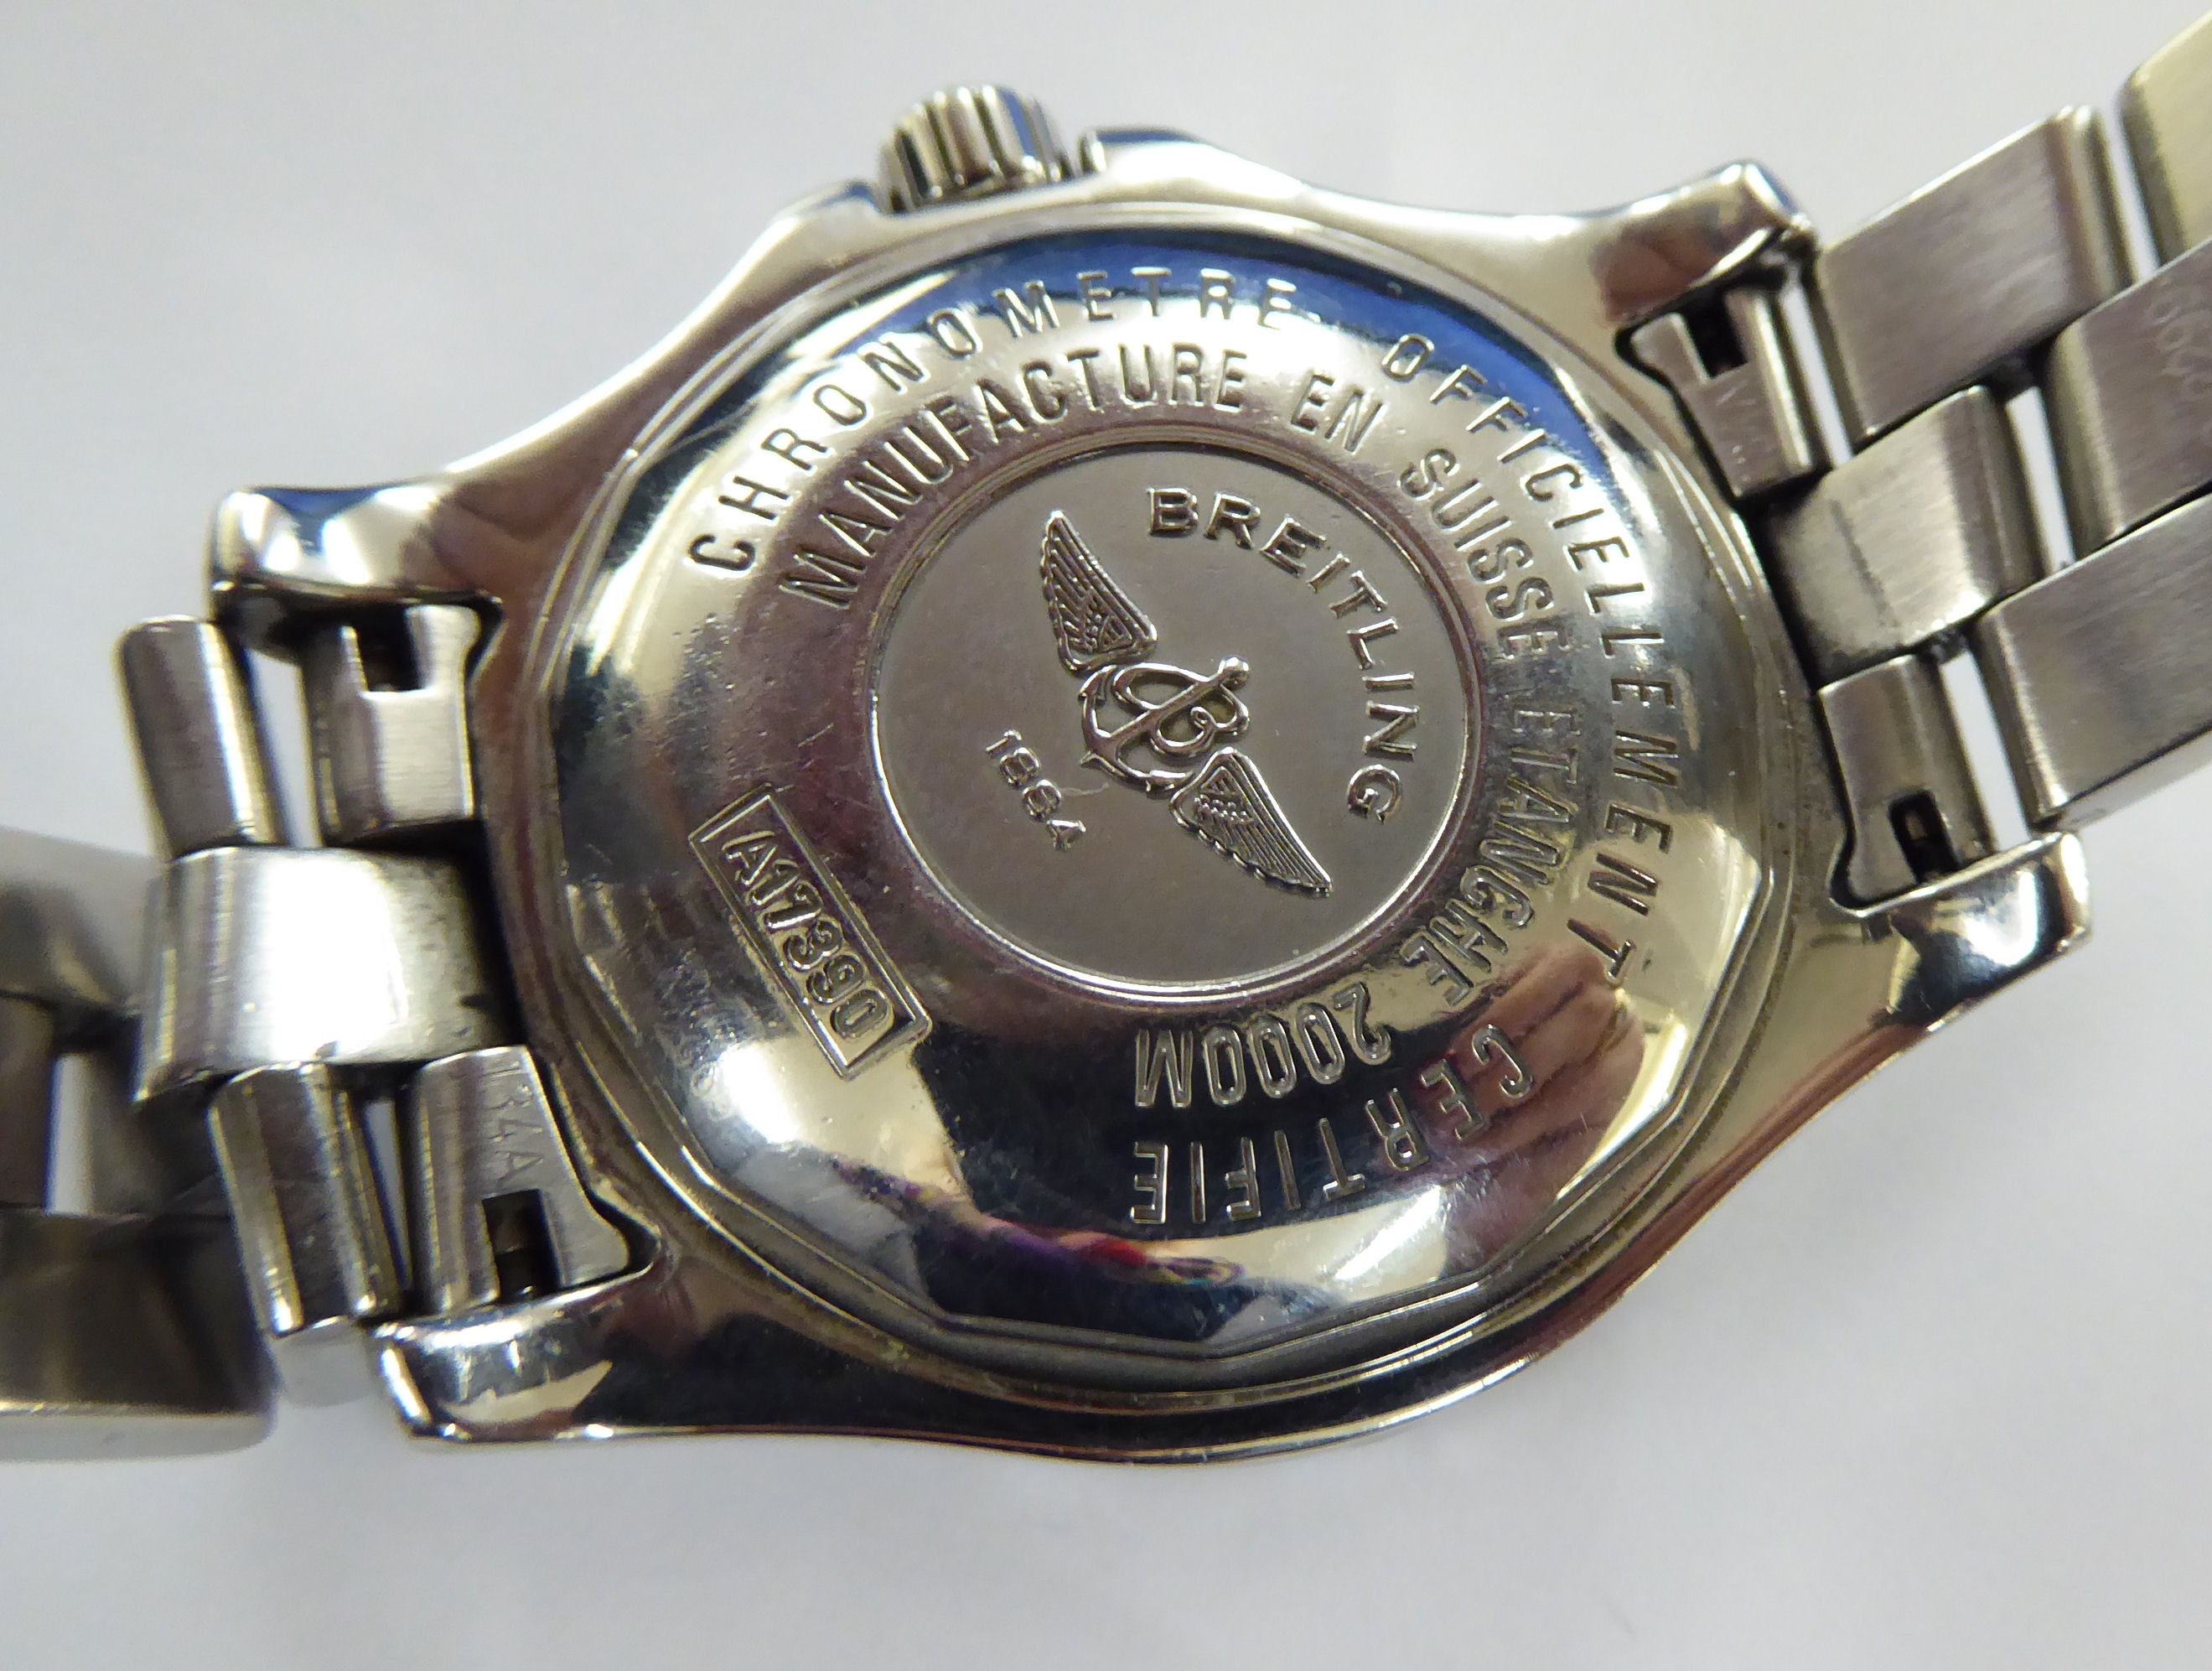 A Breitling Super Ocean stainless steel cased automatic chronometer with an original 2008 receipt, - Image 3 of 8